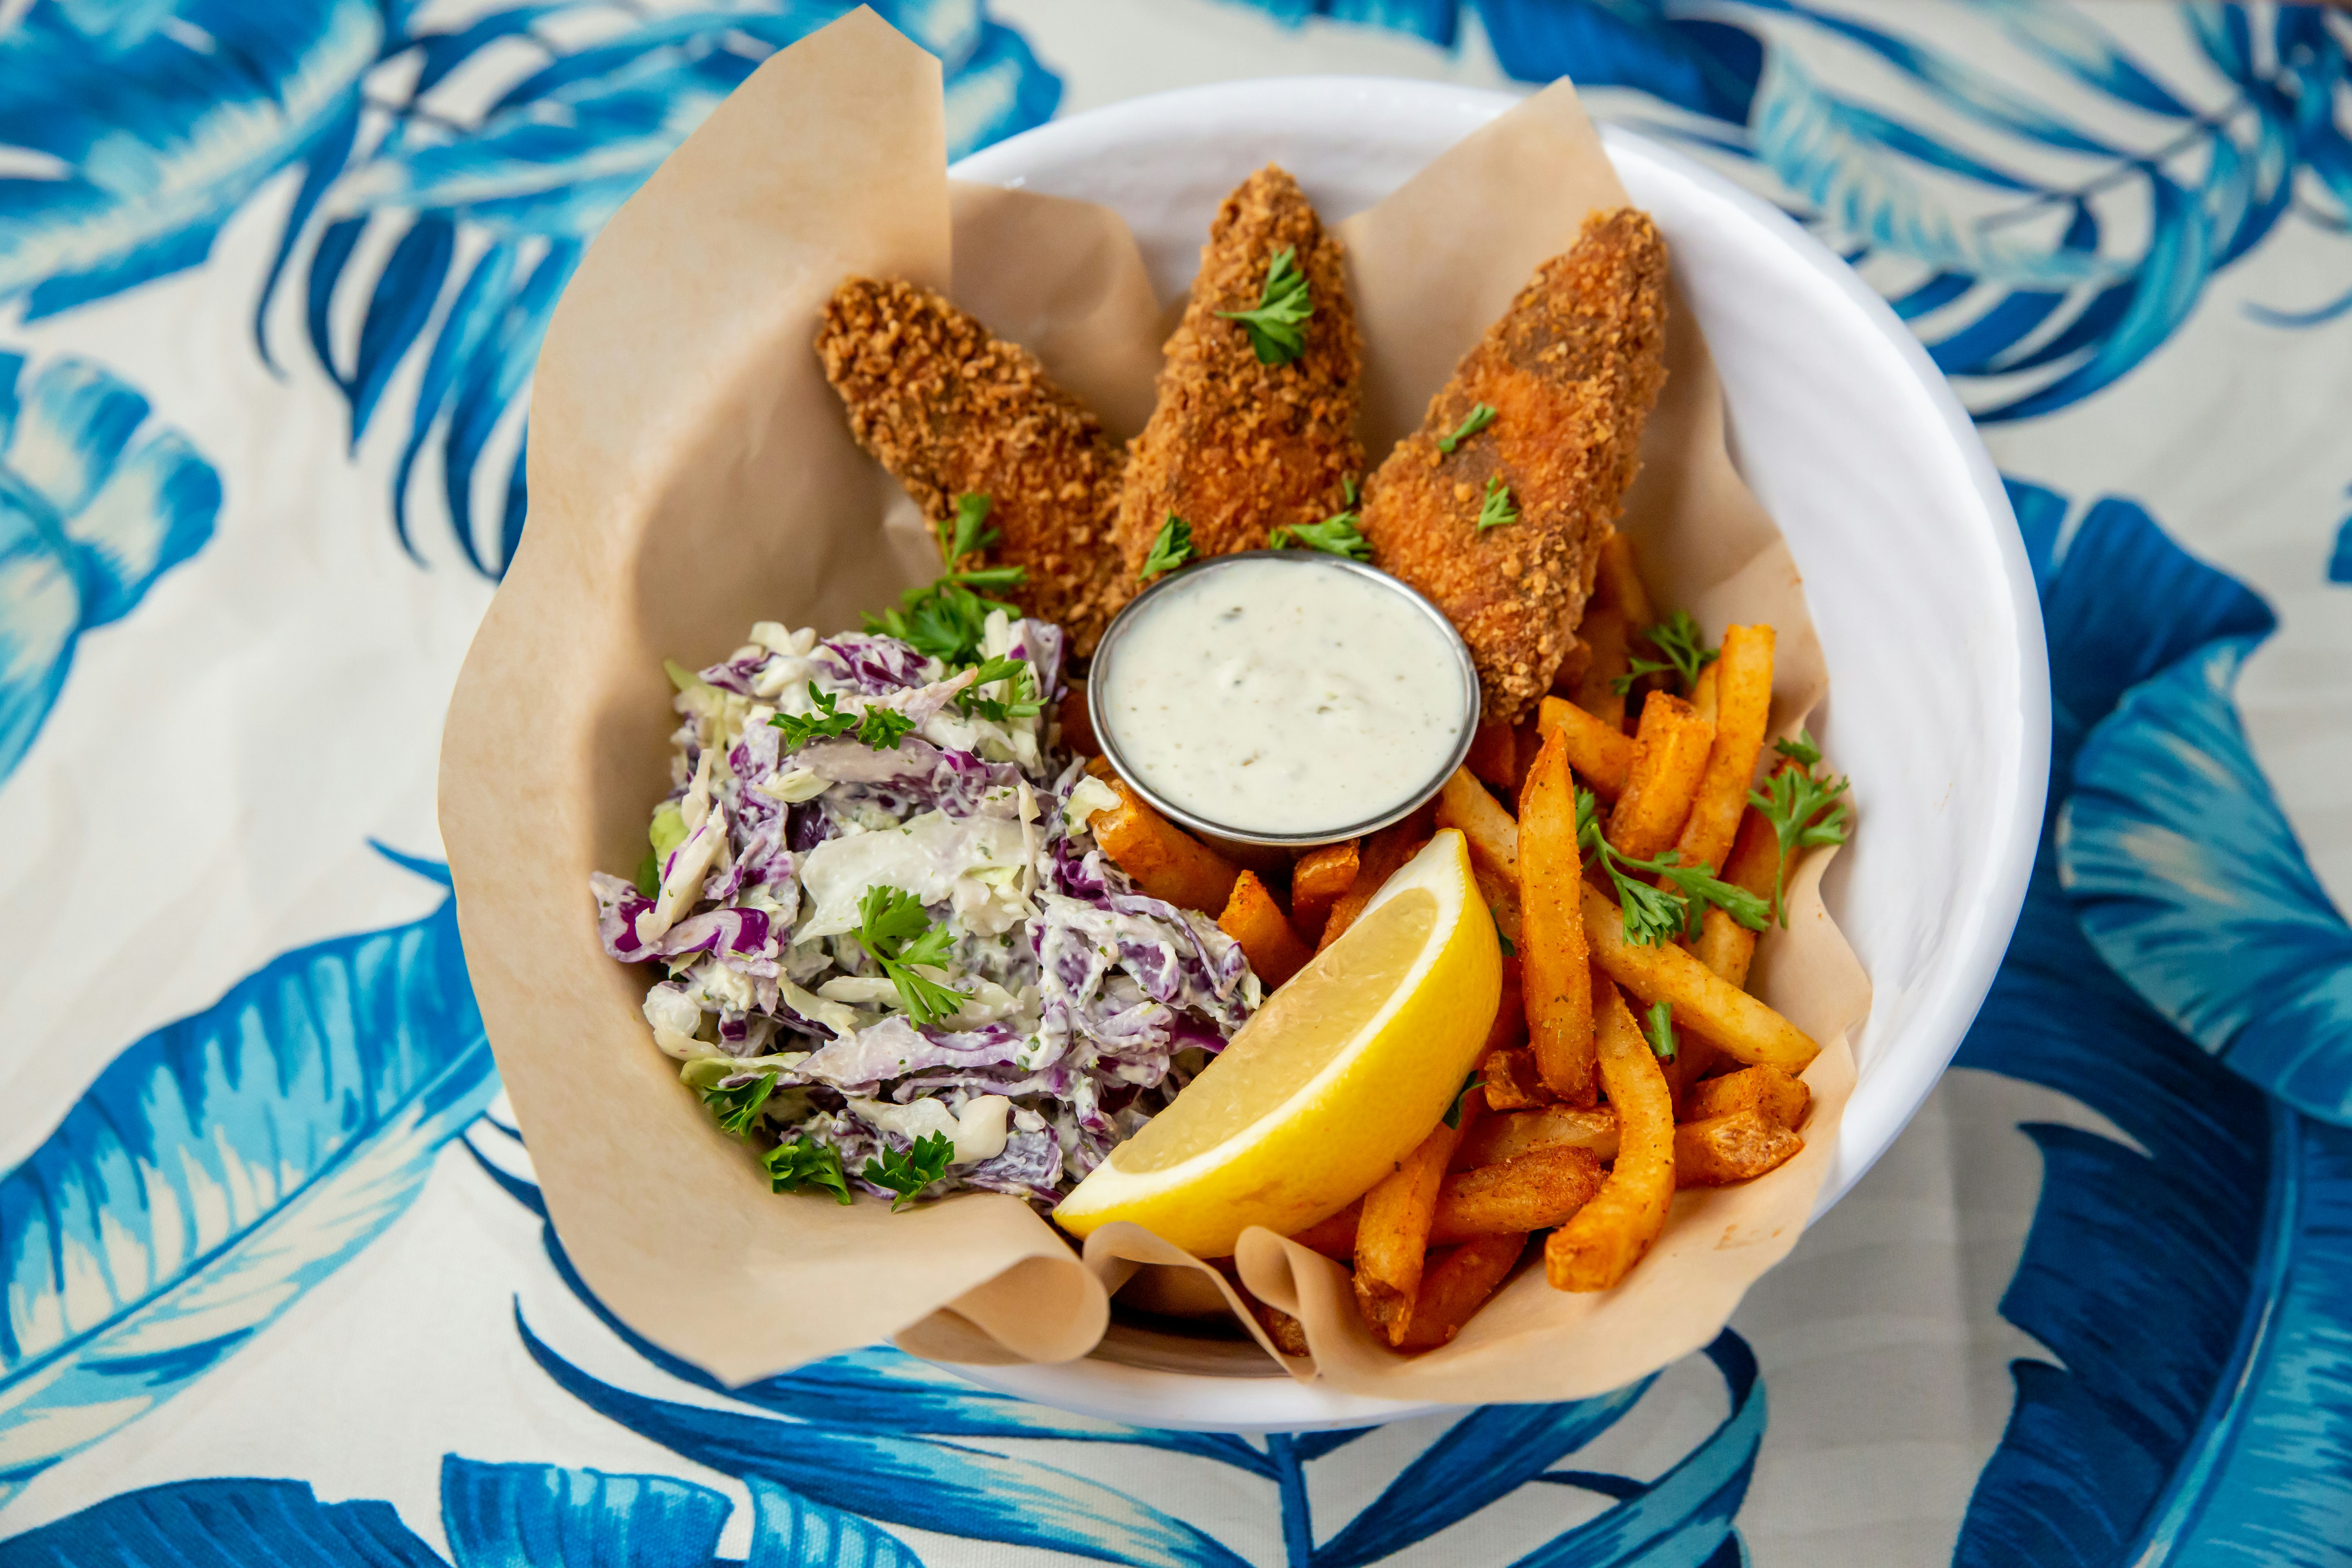 Fried tofu fish, fries and slaw with a wedge of lemon; Seattle vegan restaurants 